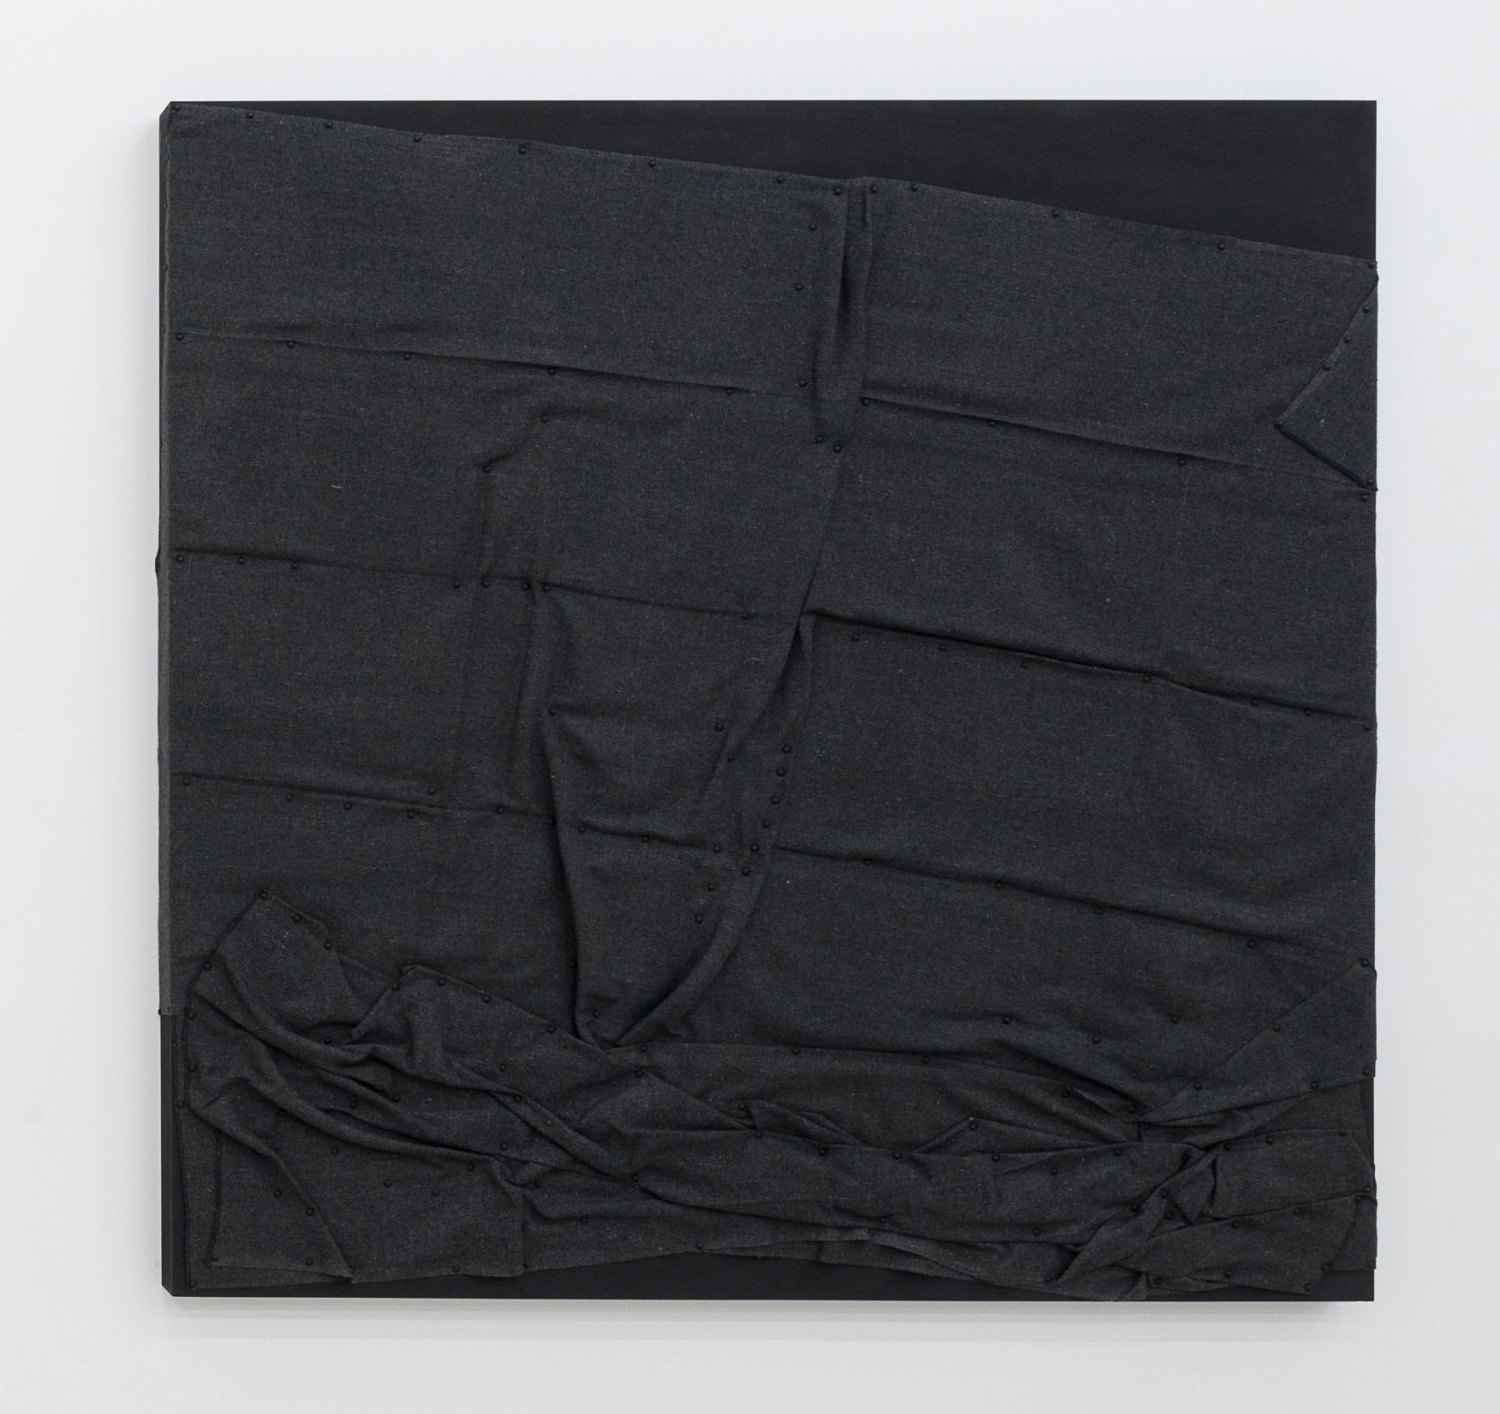 Tom Burr Untitled, 2011 Wool blankets and steel tacks on plywood 181.5 x 181.5 x 10 cm 